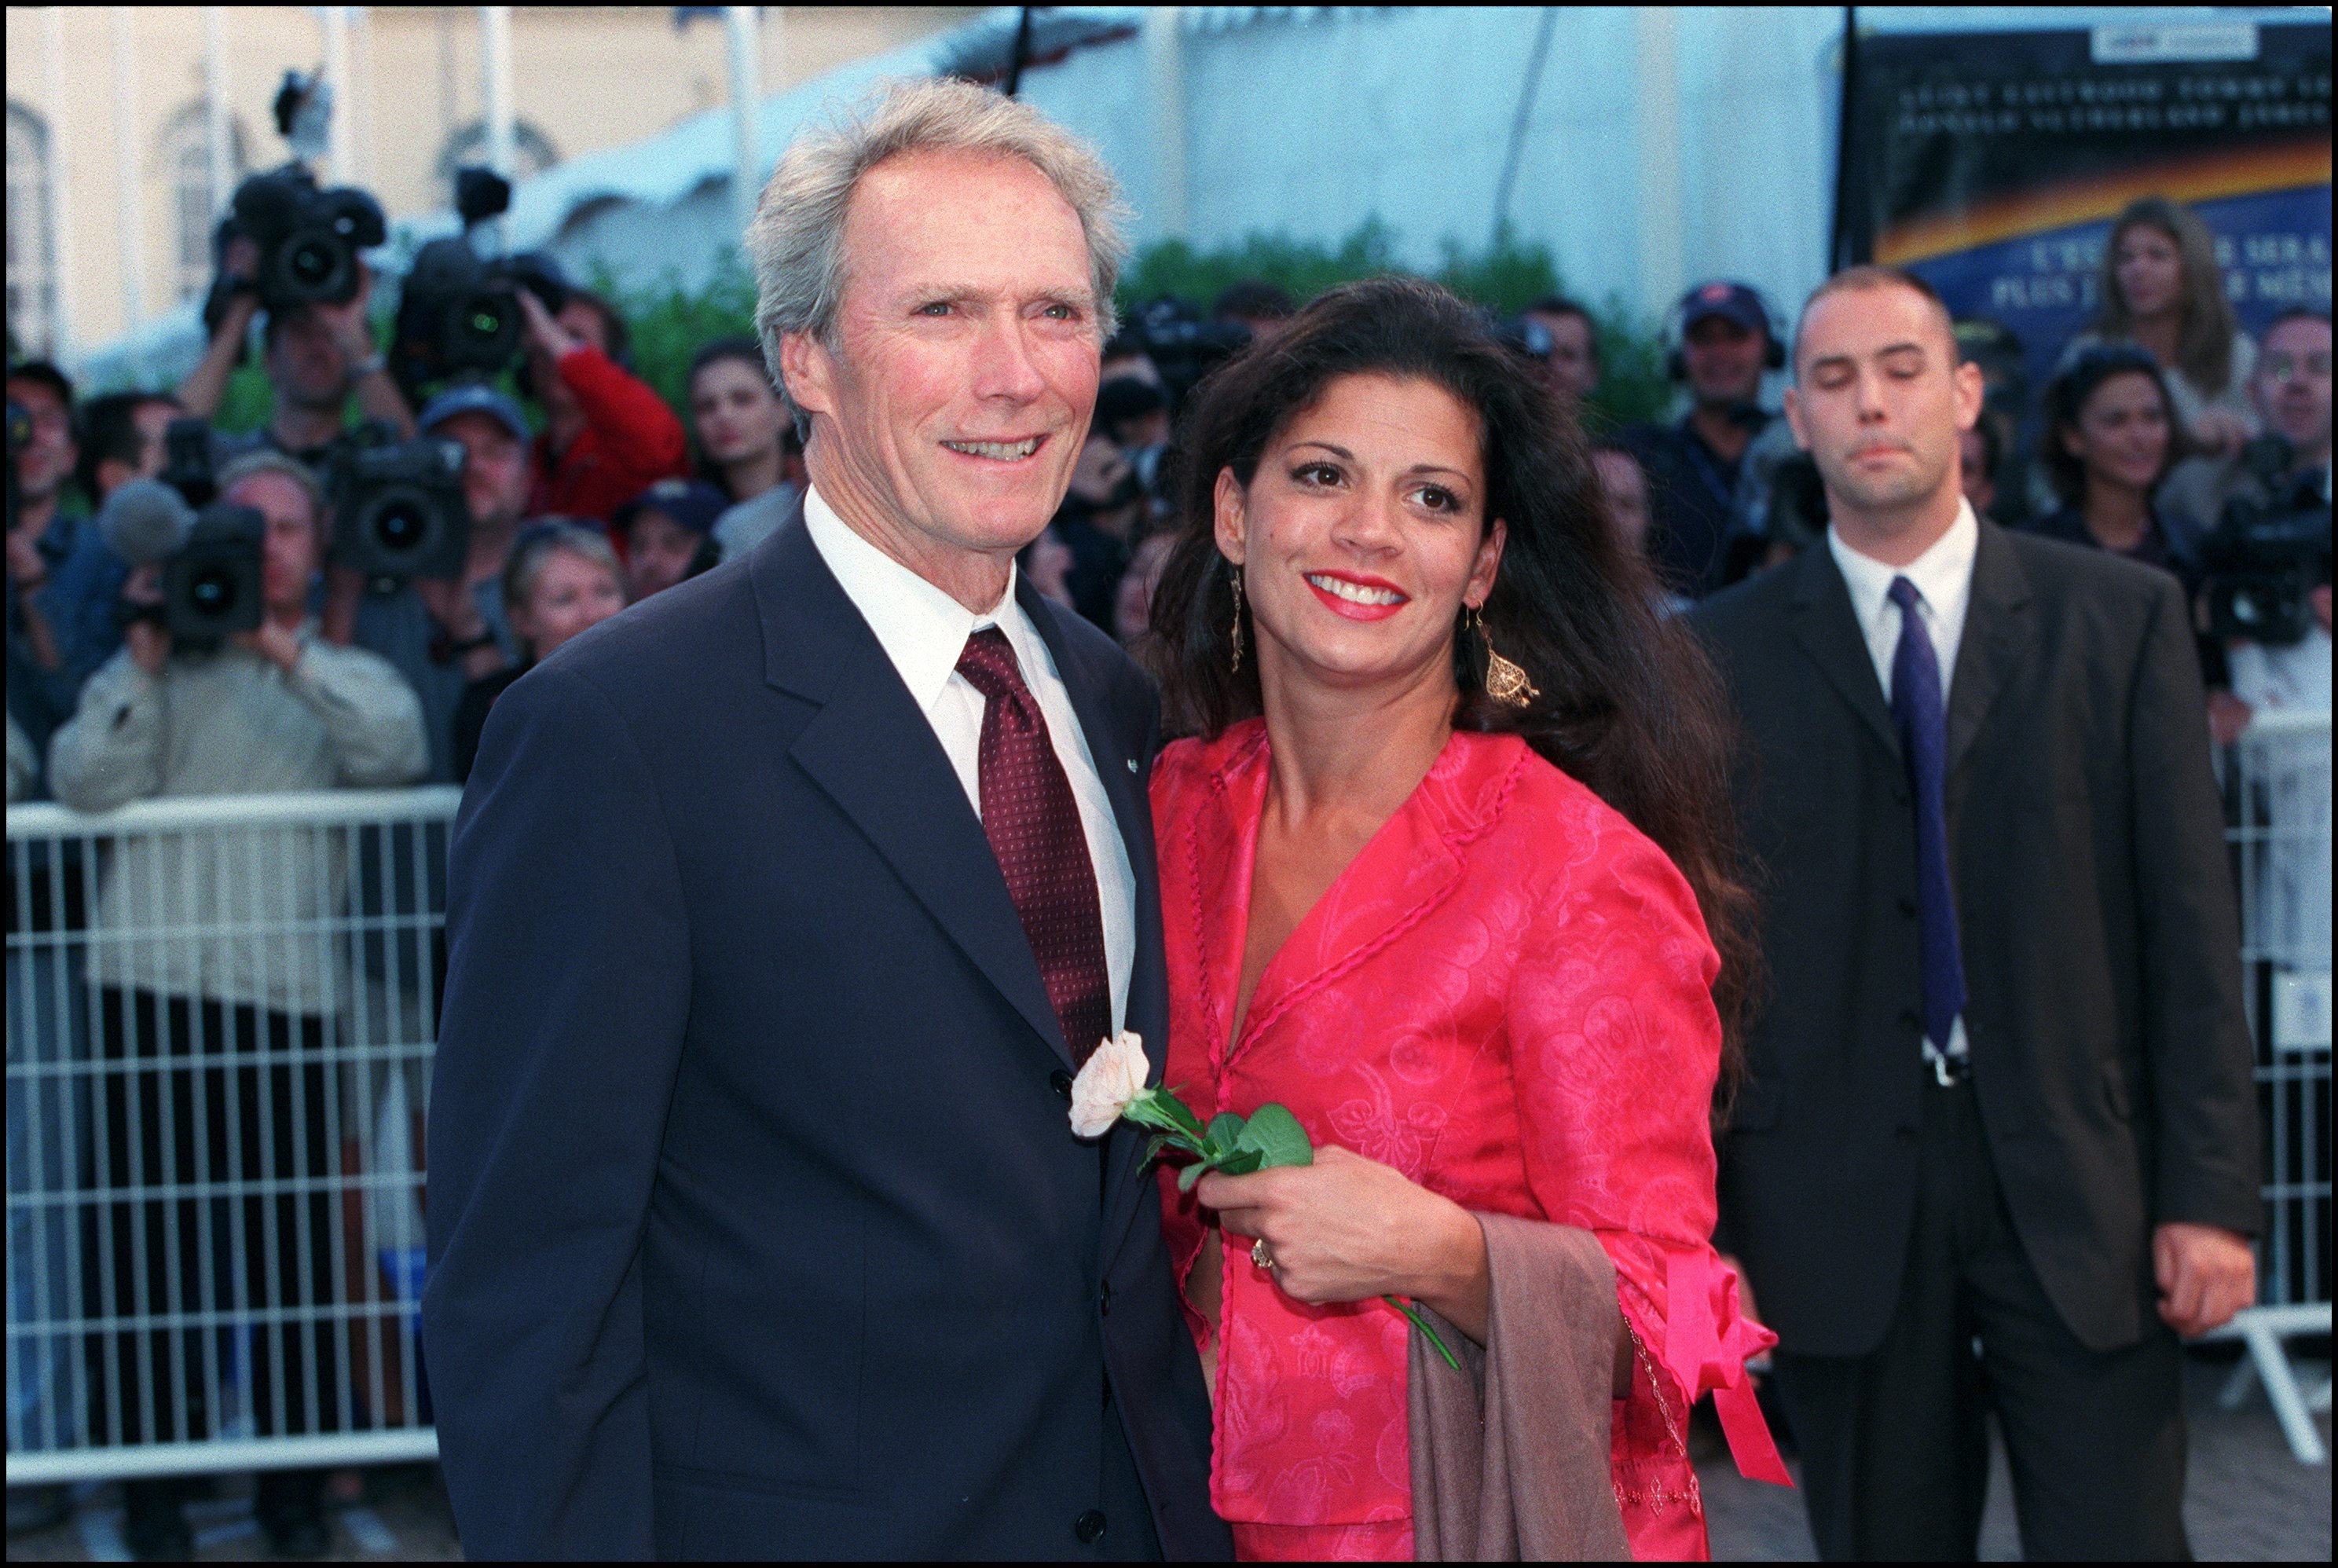 Clint Eastwood and Dina Ruiz in Deauville, France on September 02, 2000. | Source: Getty Images